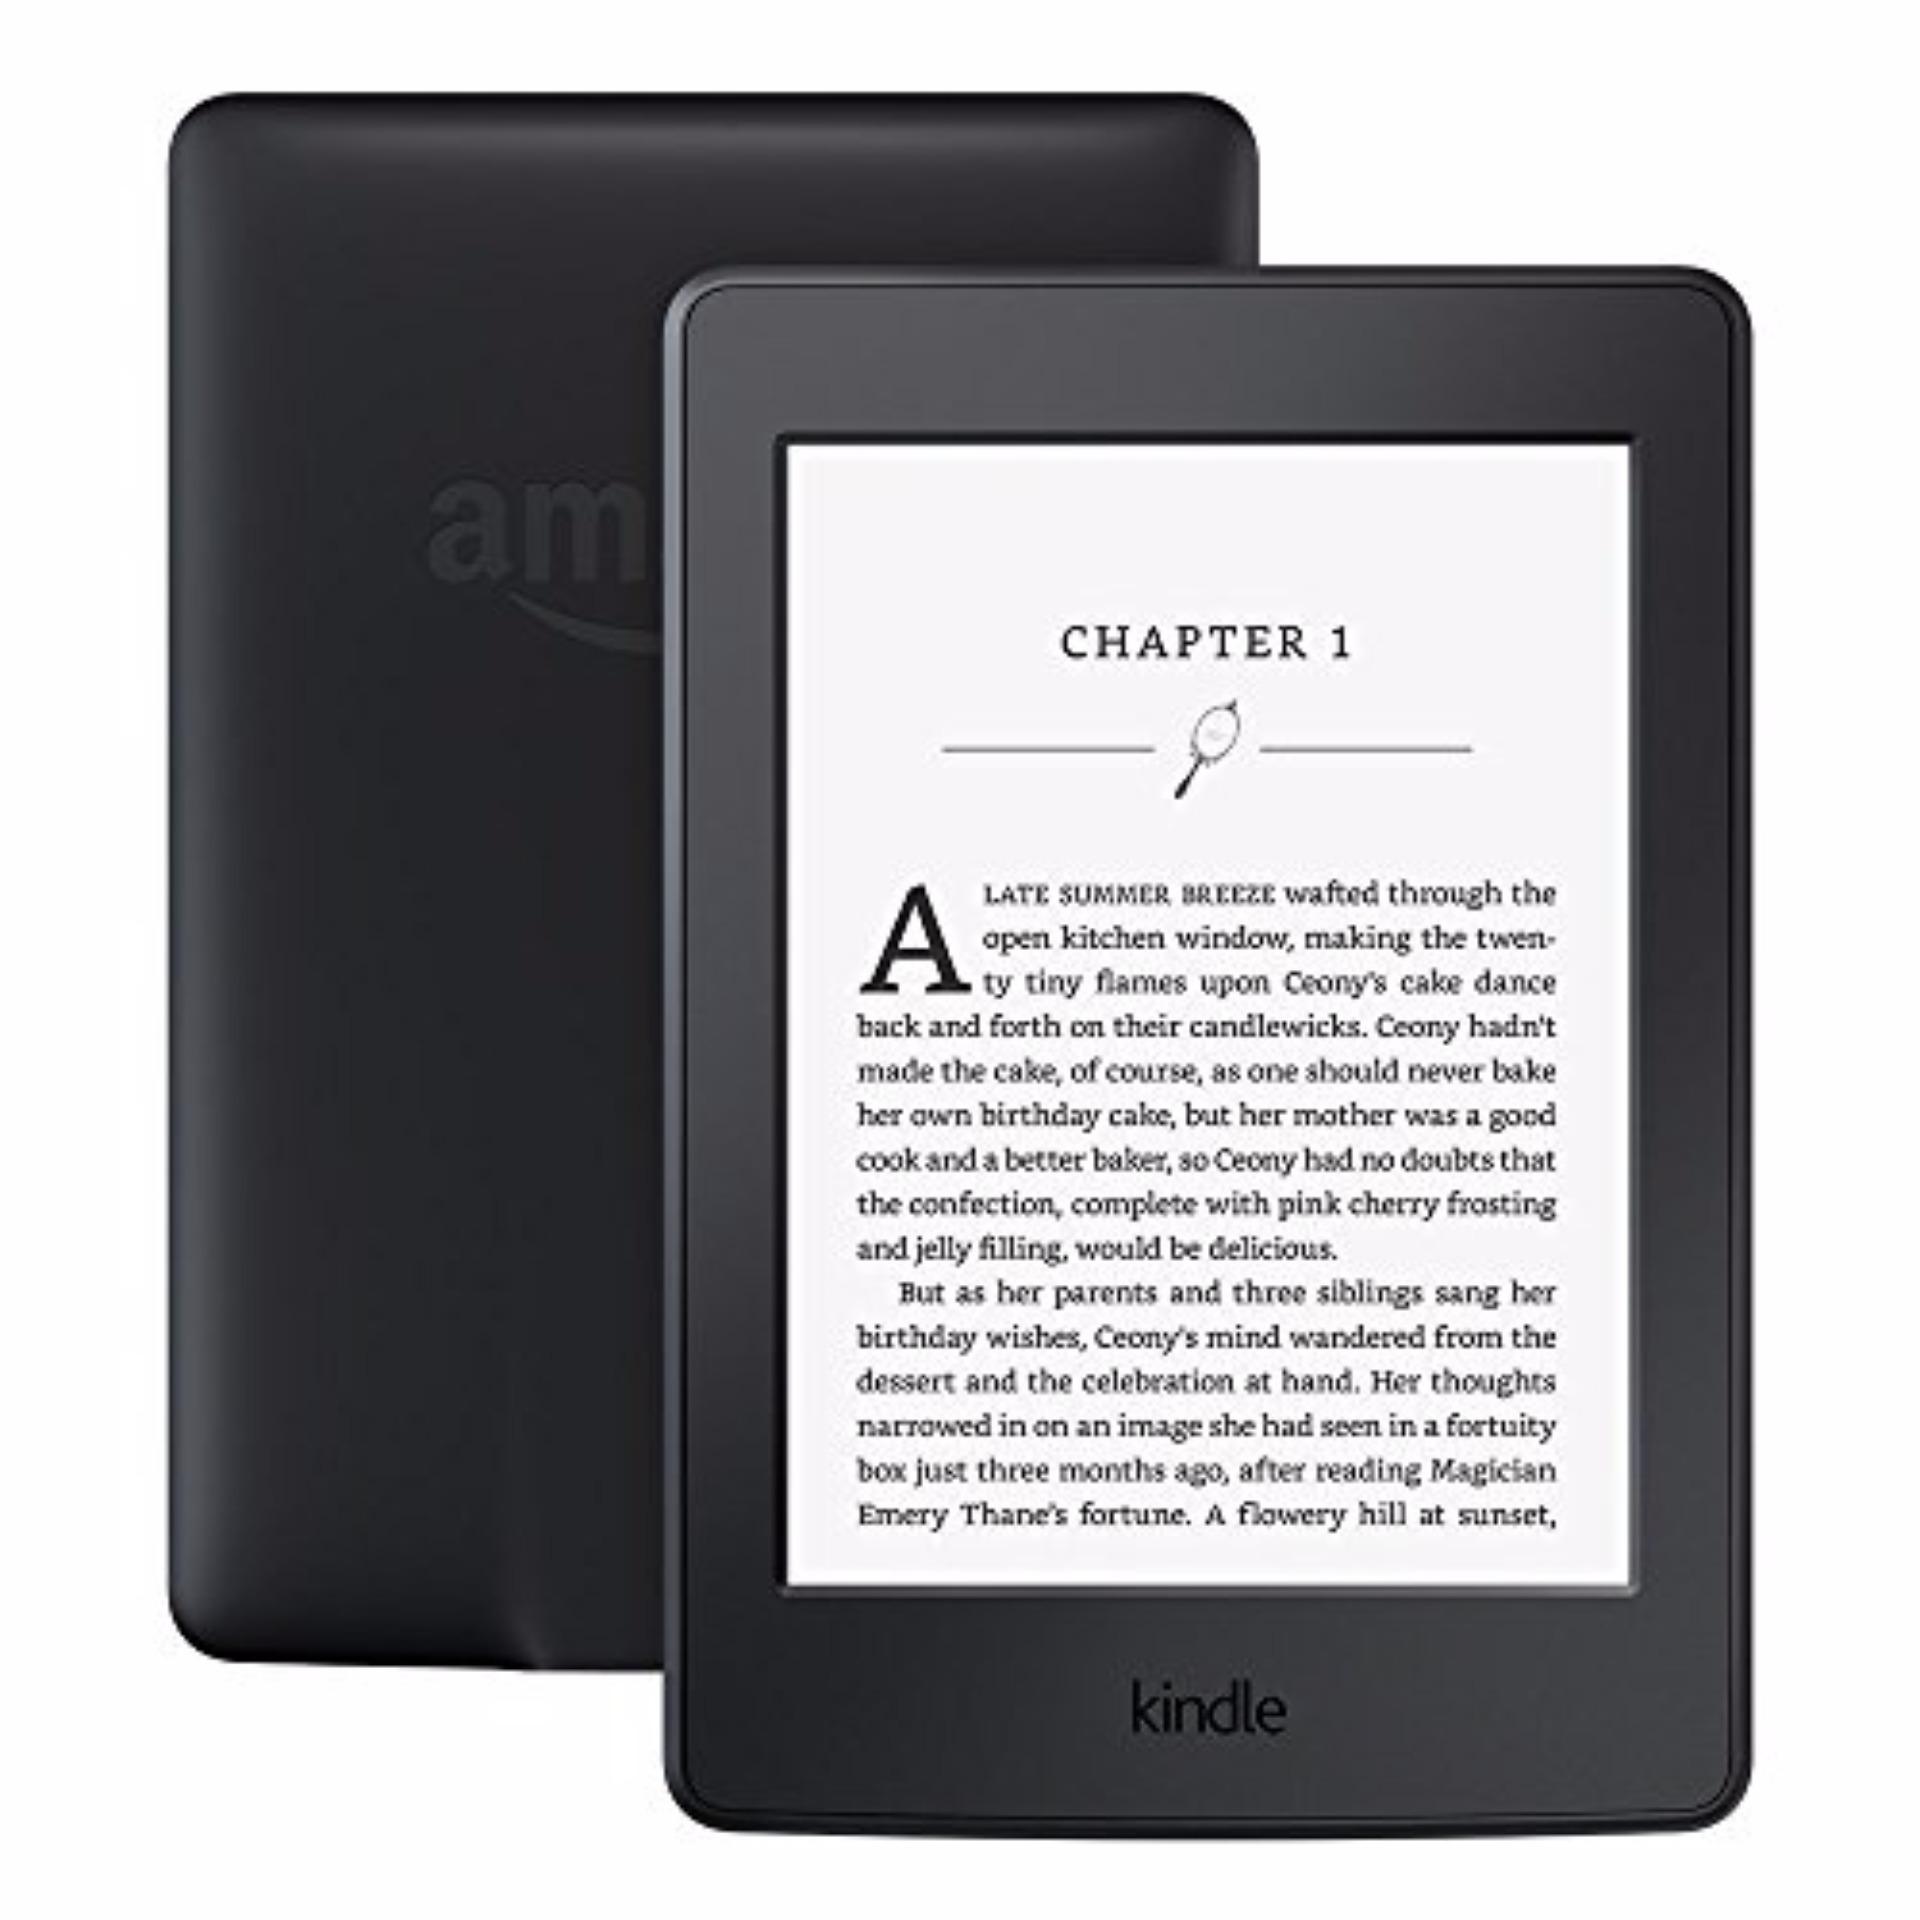 Certified Refurbished Kindle Paperwhite 3 – Black 2015, 6″ High-Resolution Display (300 ppi) with Built-in Light, Wi-Fi – Includes Special Offers